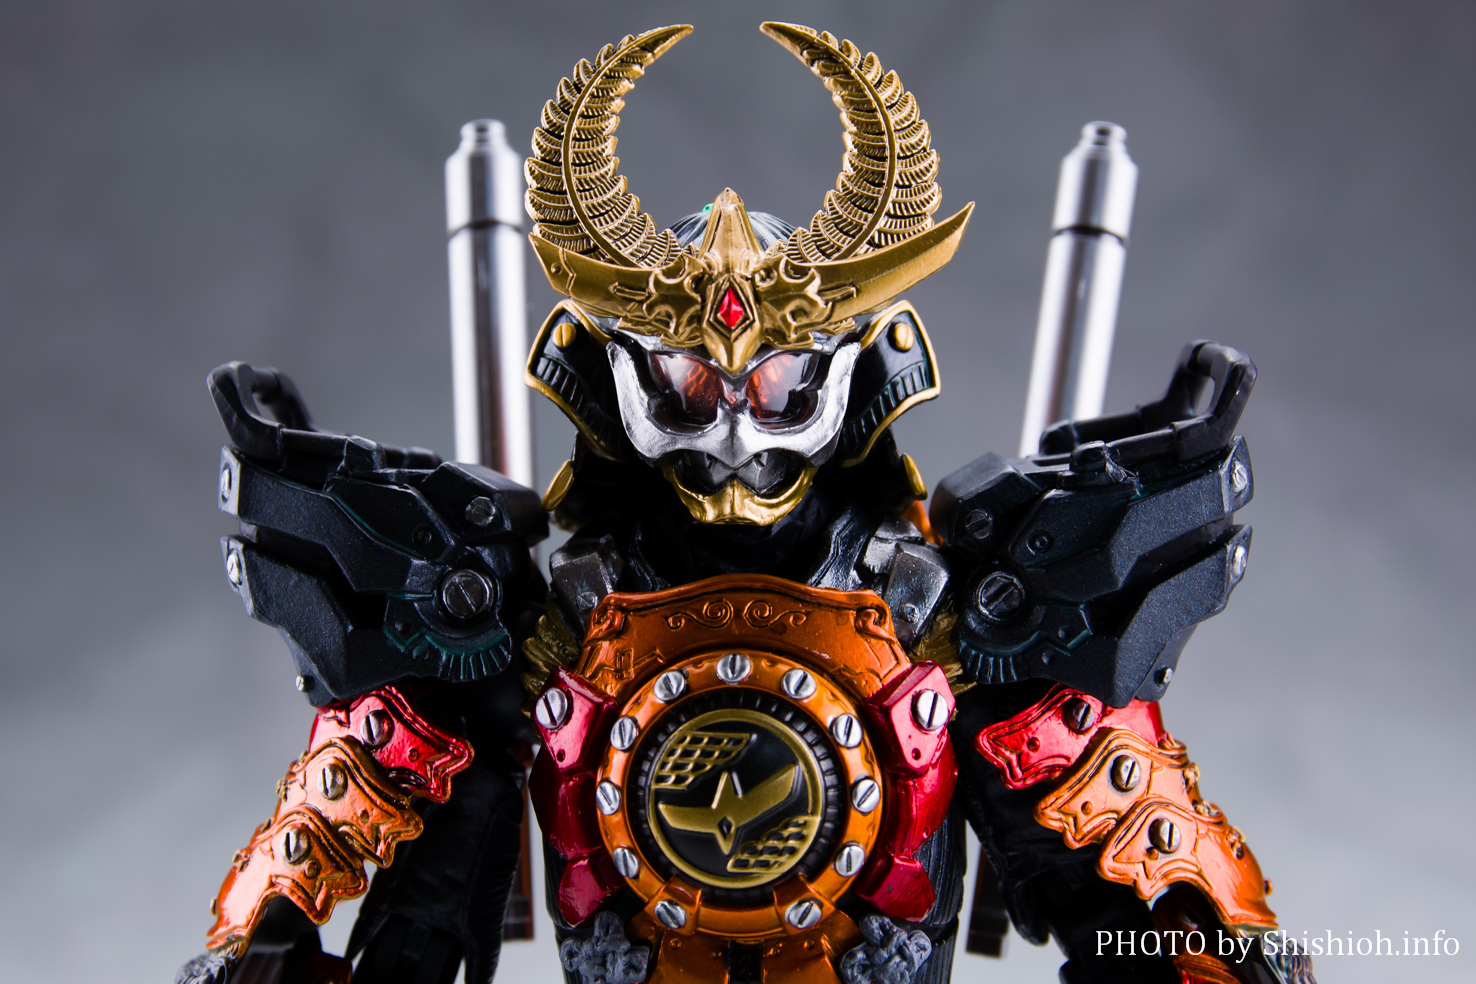 S.I.C. 仮面ライダー鎧武 カチドキアームズ